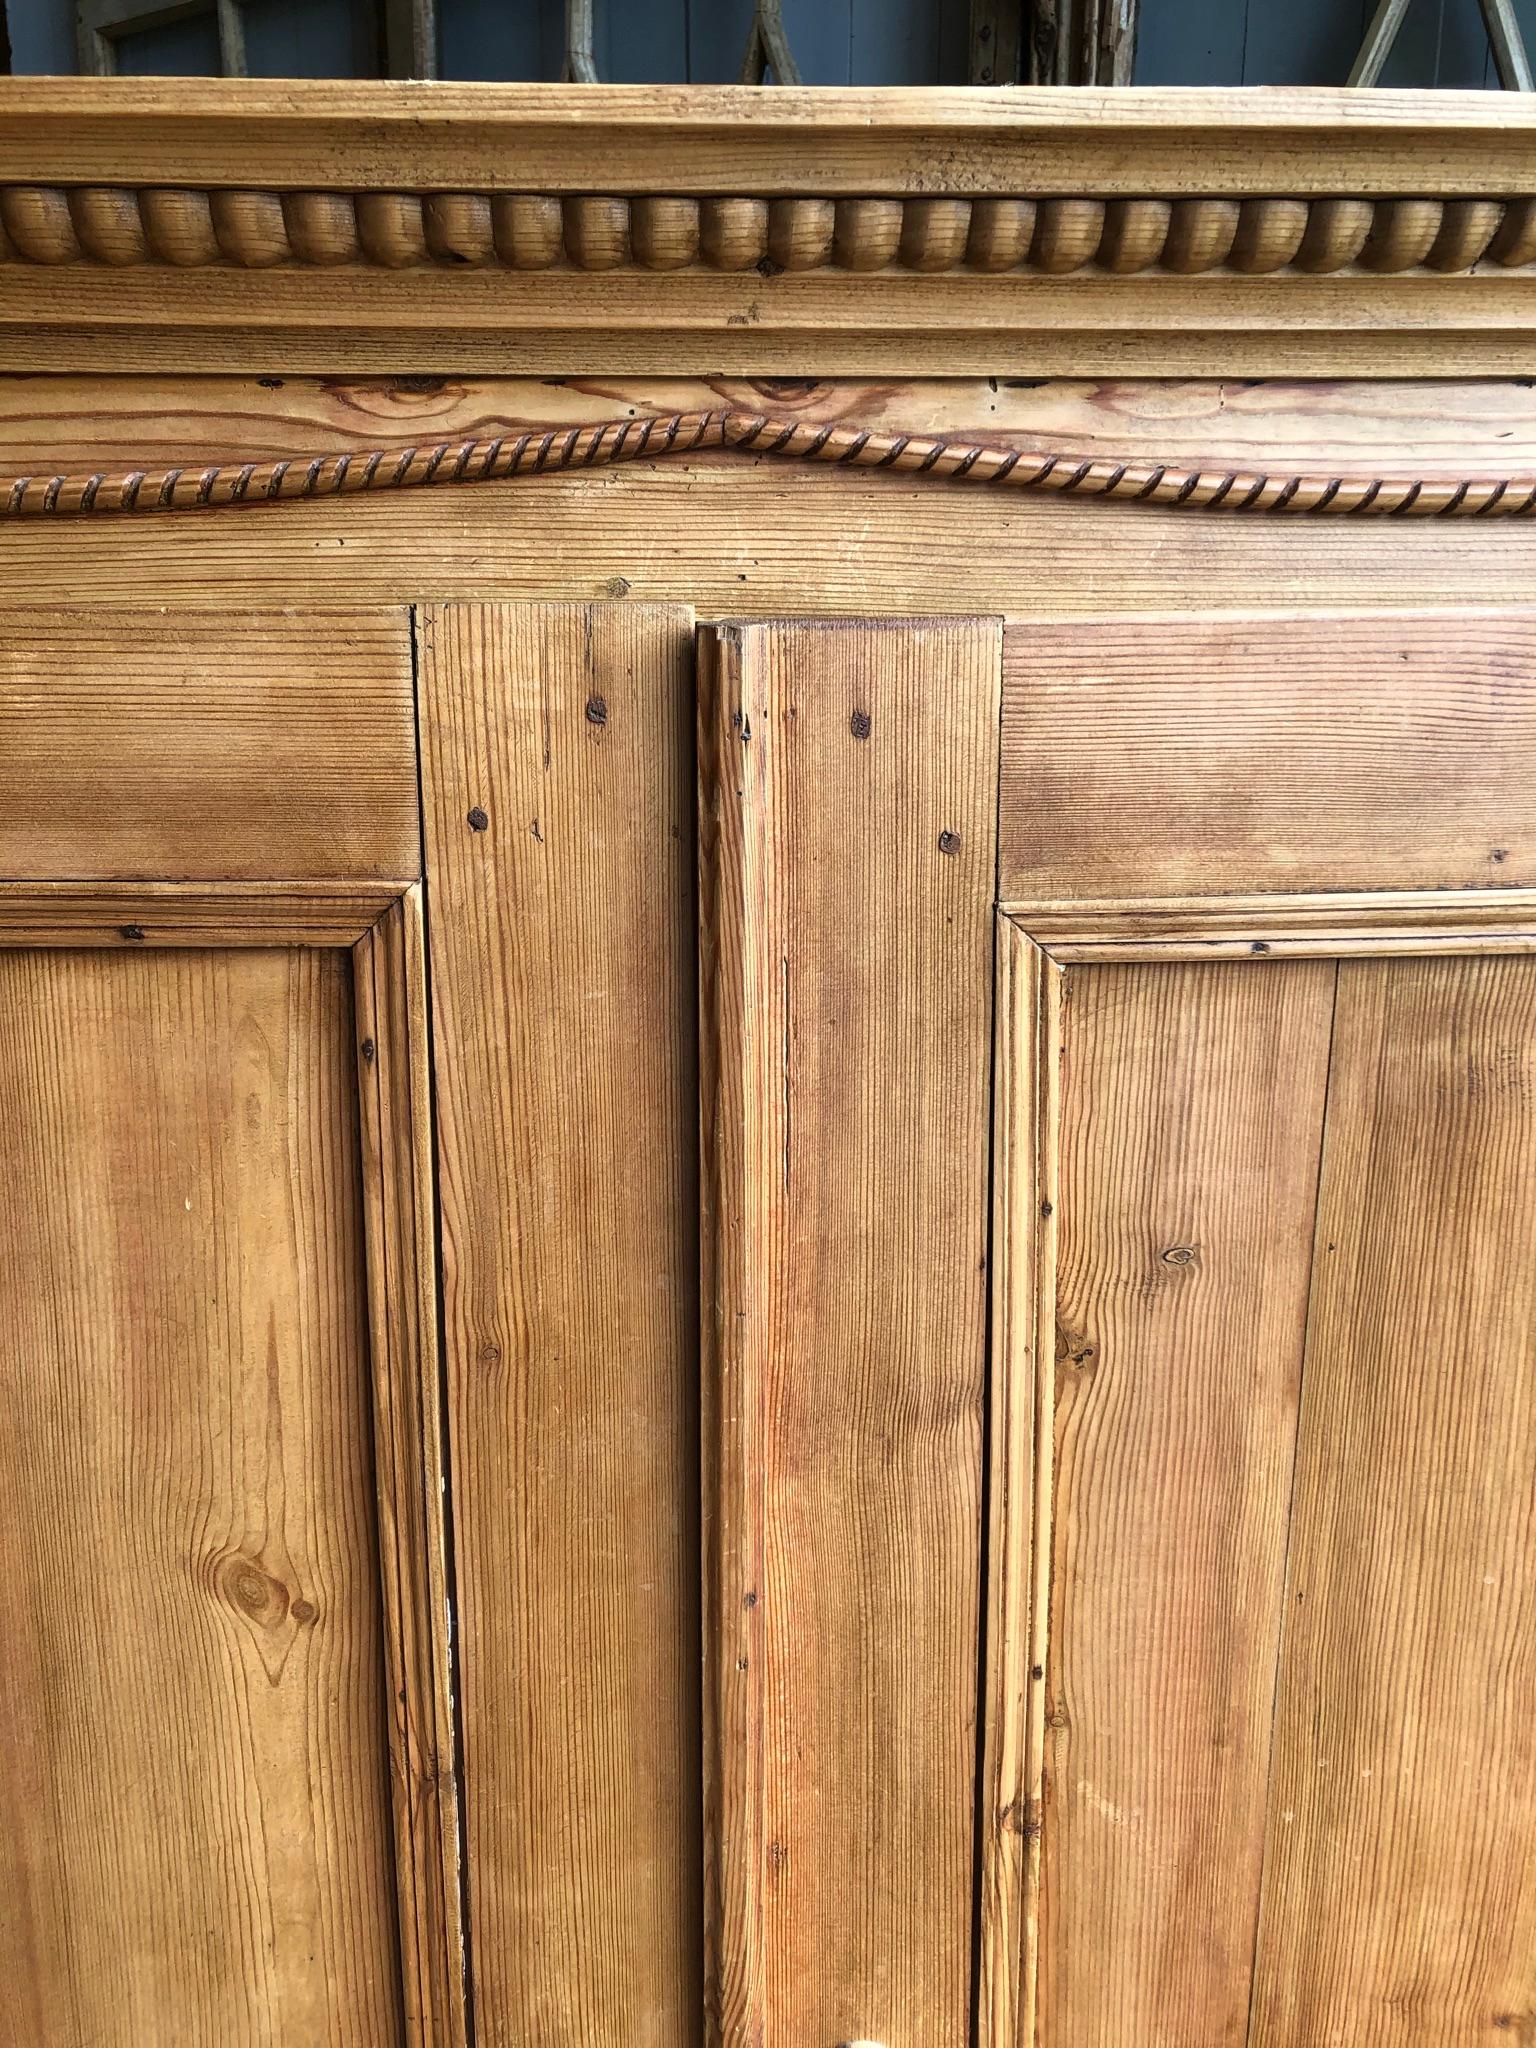 19th Century Small Pine Armoire, French